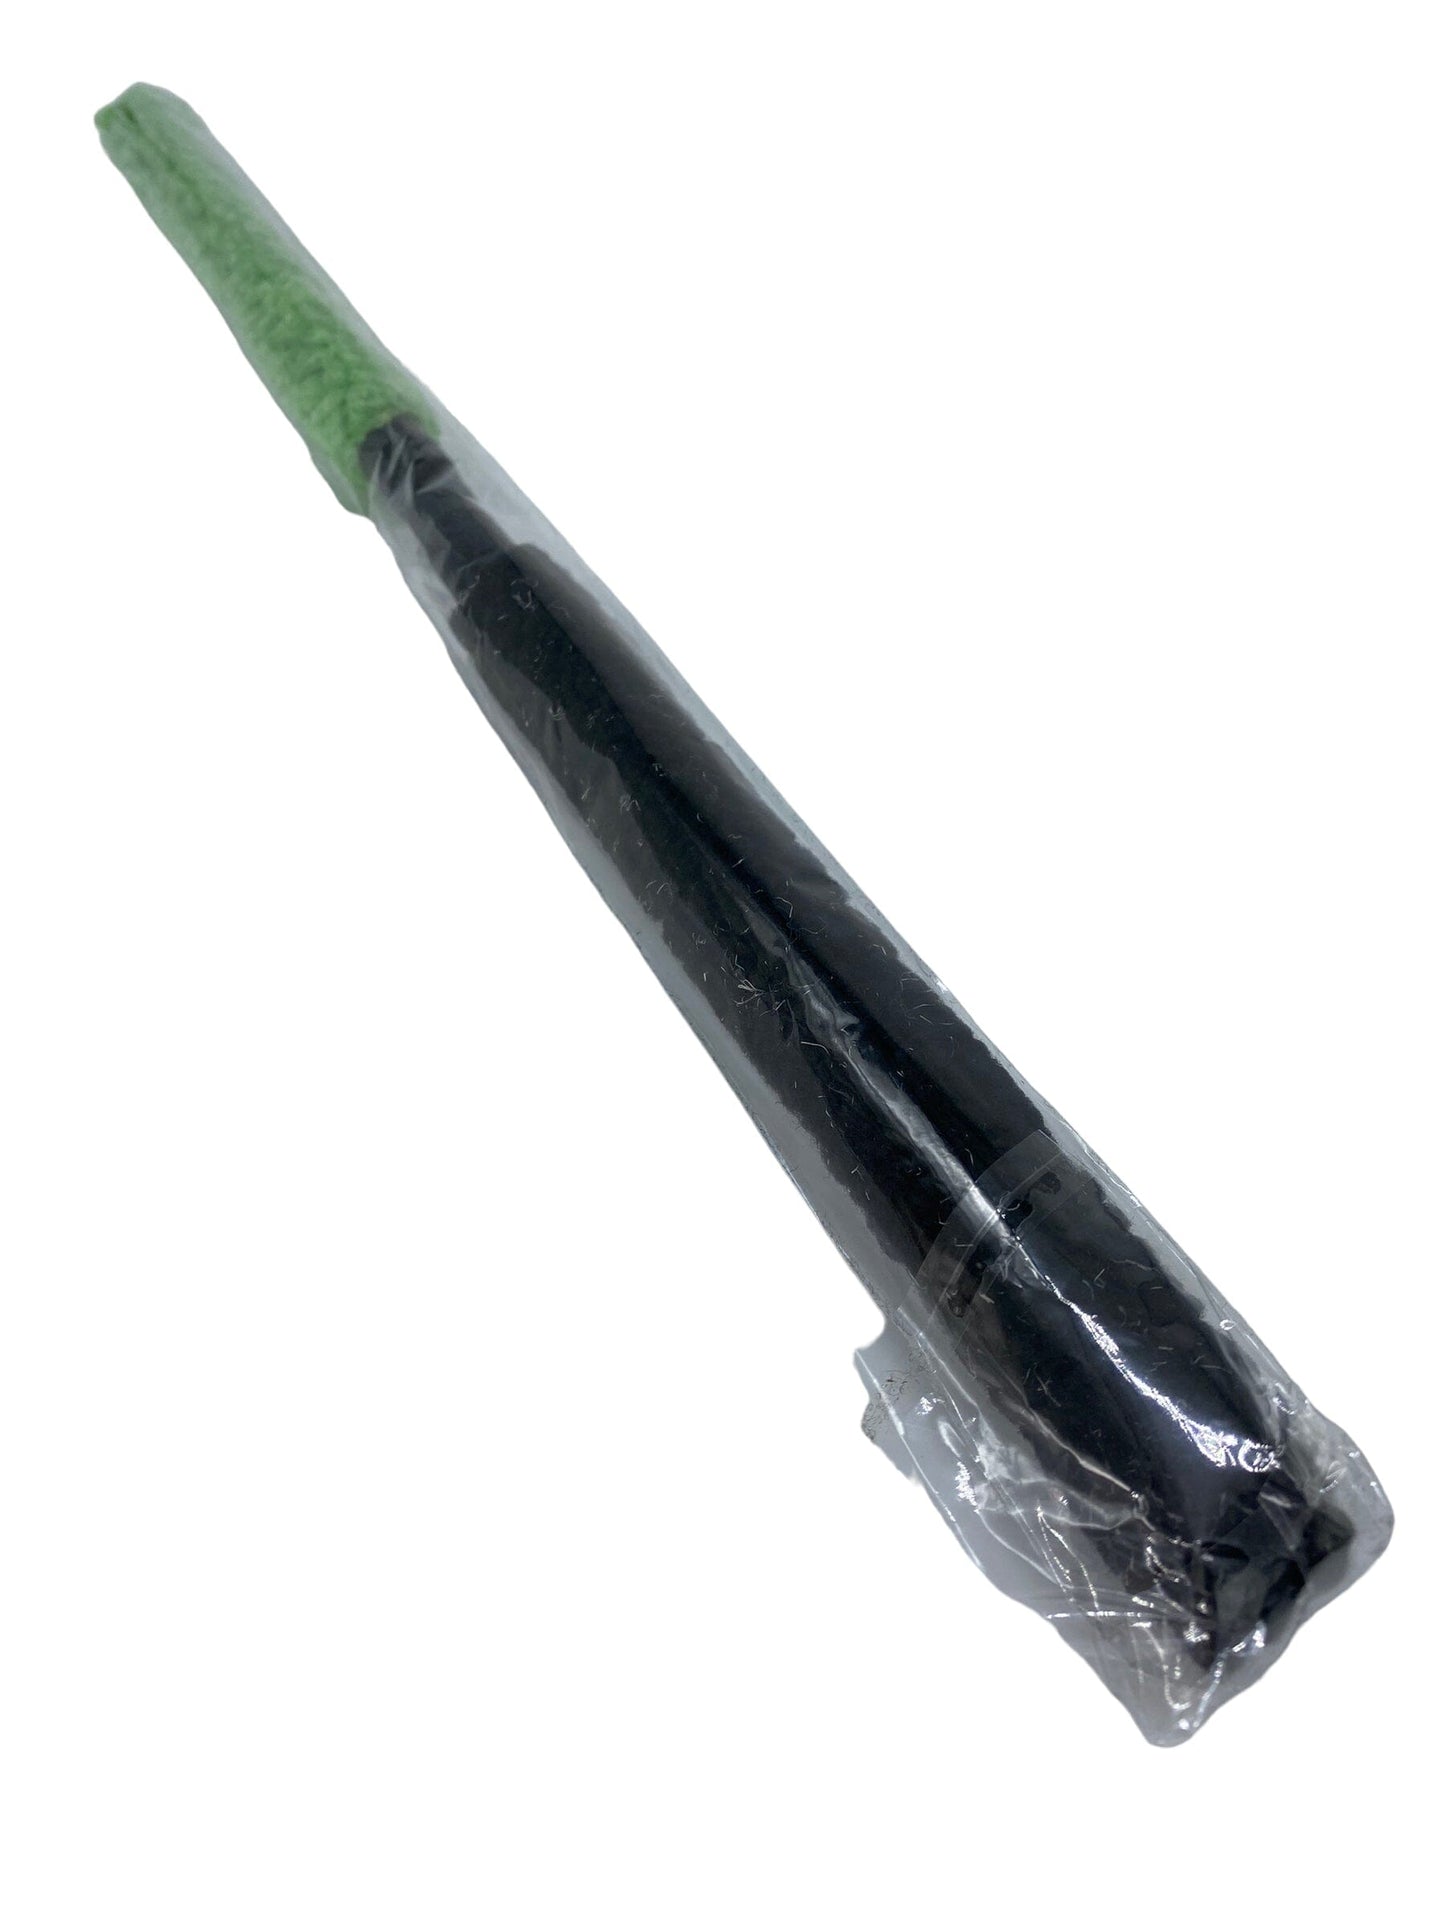 Used New Paintball Barrel Swab / Squeegee CPXBrosPaintball 